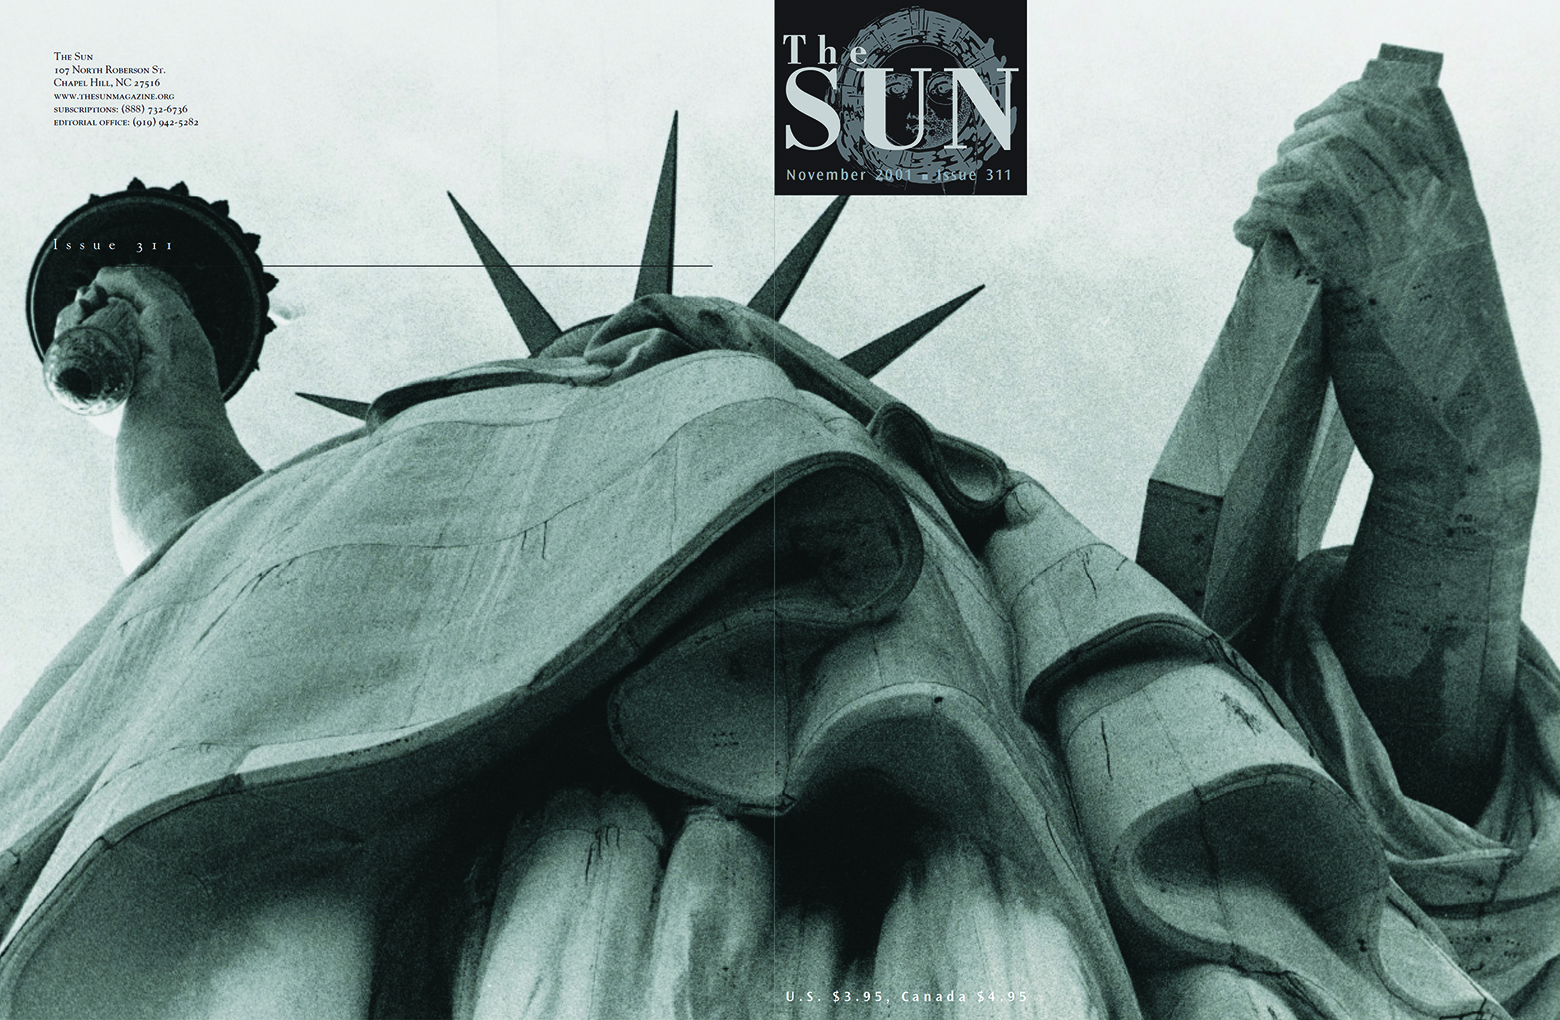 November 2001 cover of The Sun. Released after the terrorist attacks of 9/11, the cover features a black logo and its photo wraps around to the back, turning a portrait of the Statue of Liberty into a landscape.